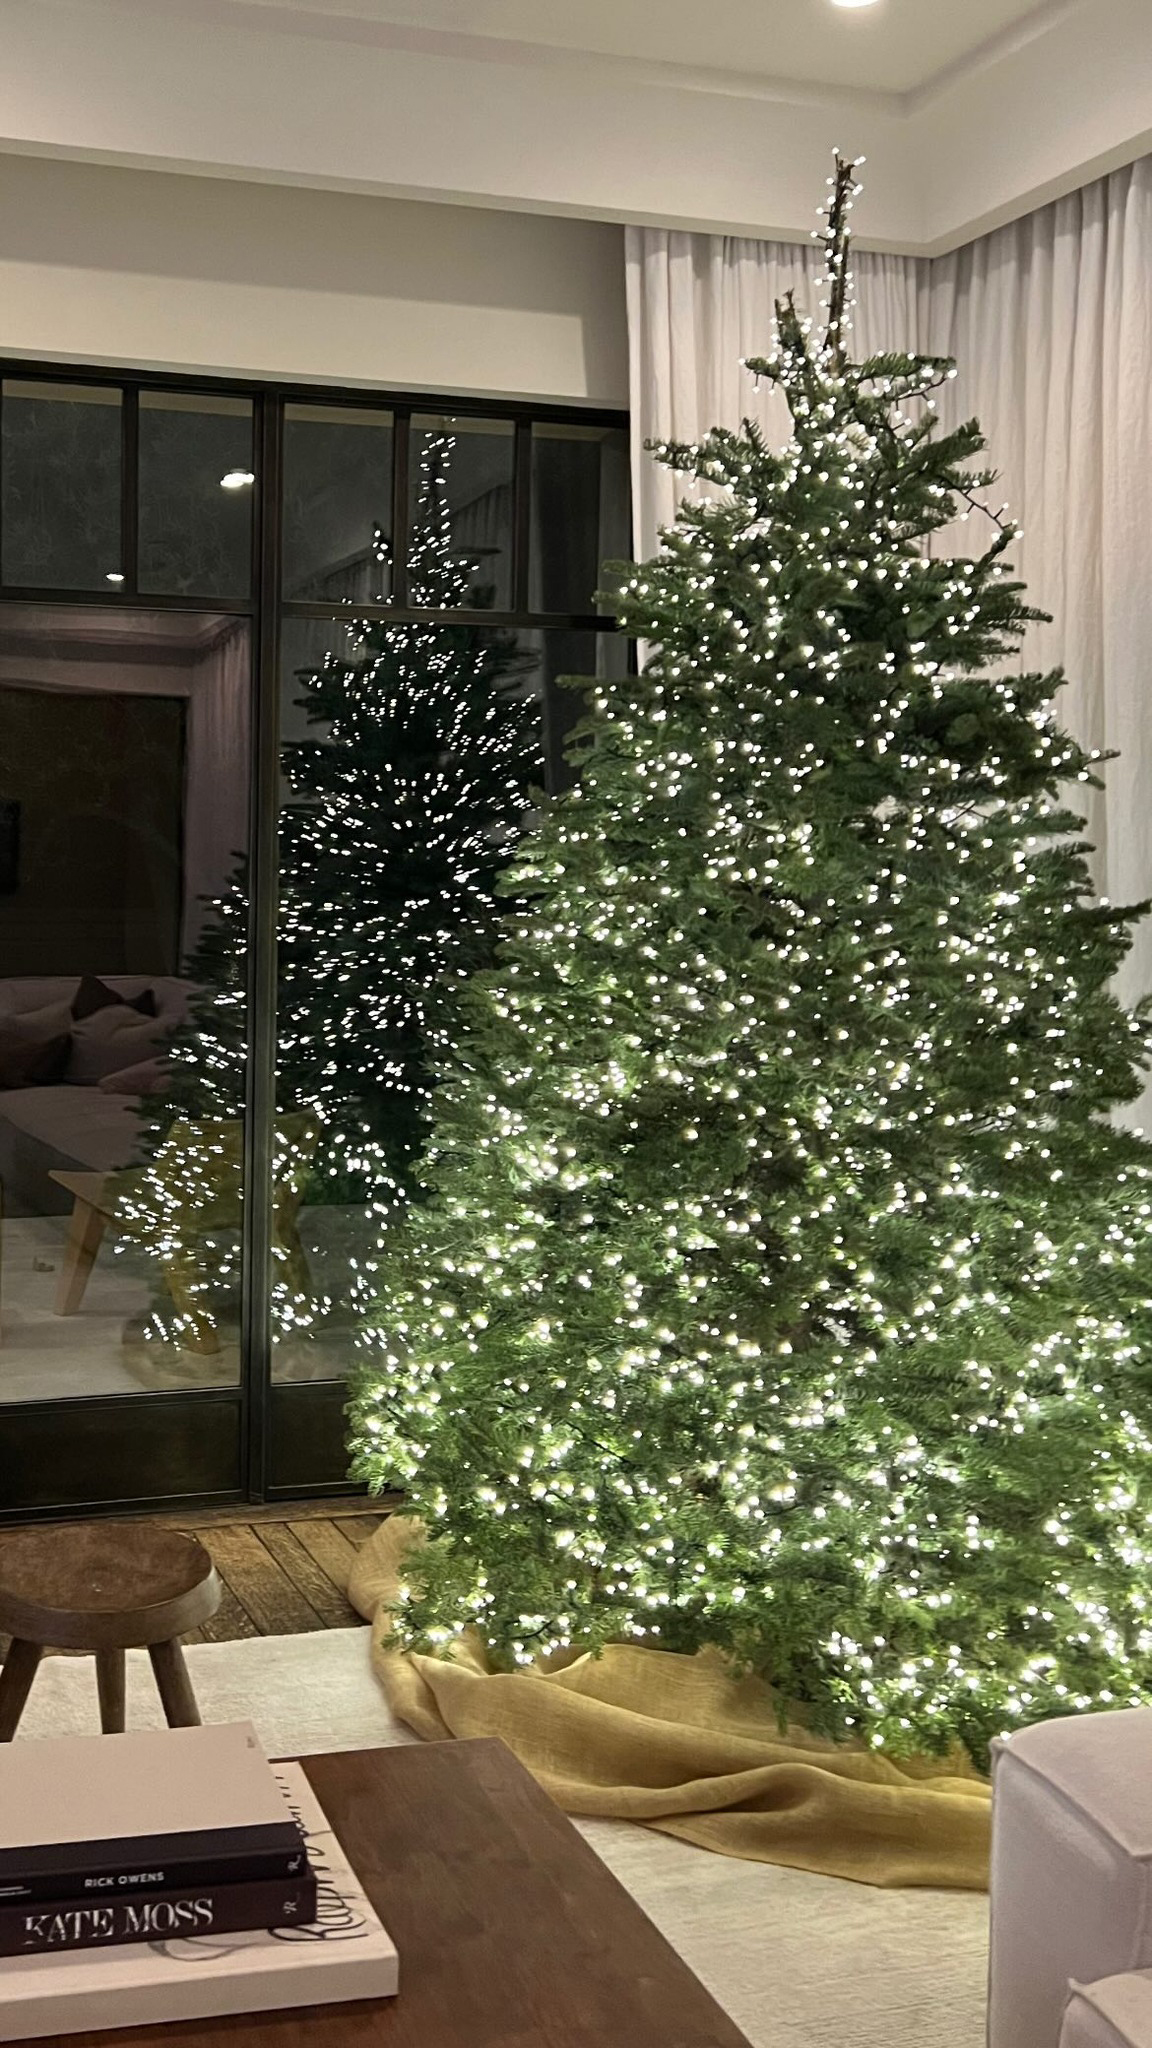 Kourtney showed off her Christmas tree covered in lights